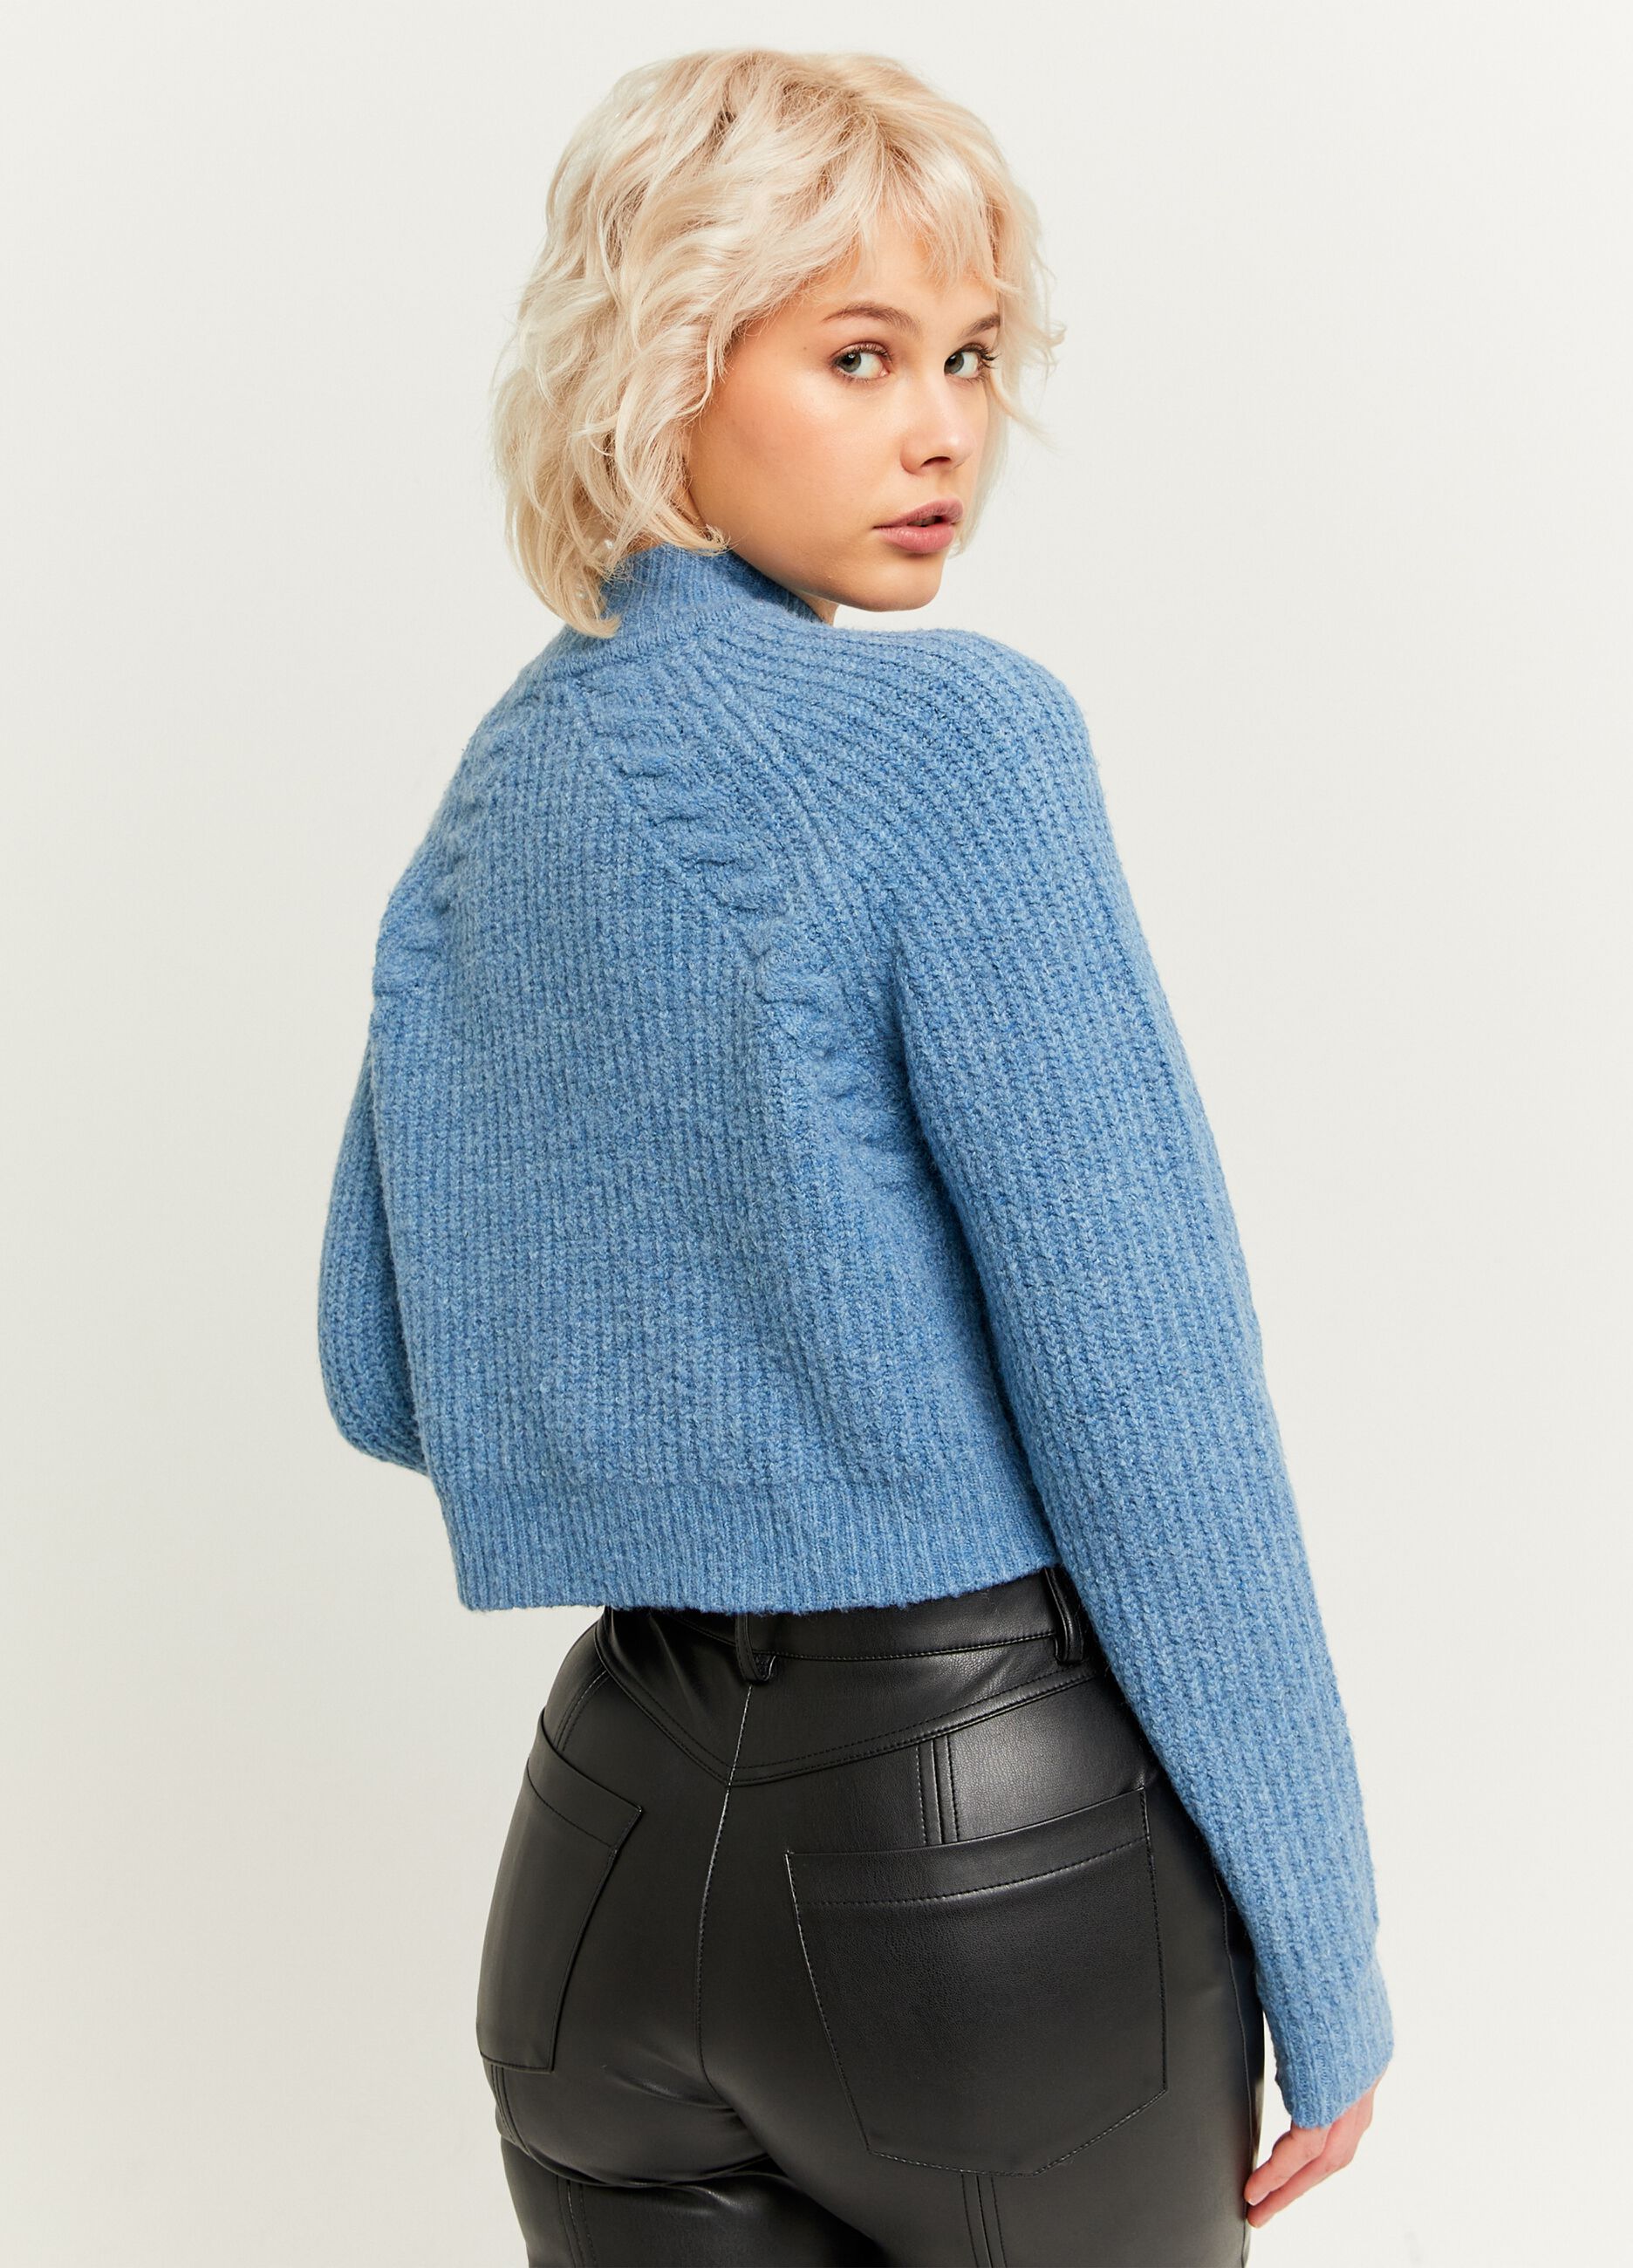 Ribbed crop pullover with cable-knit details